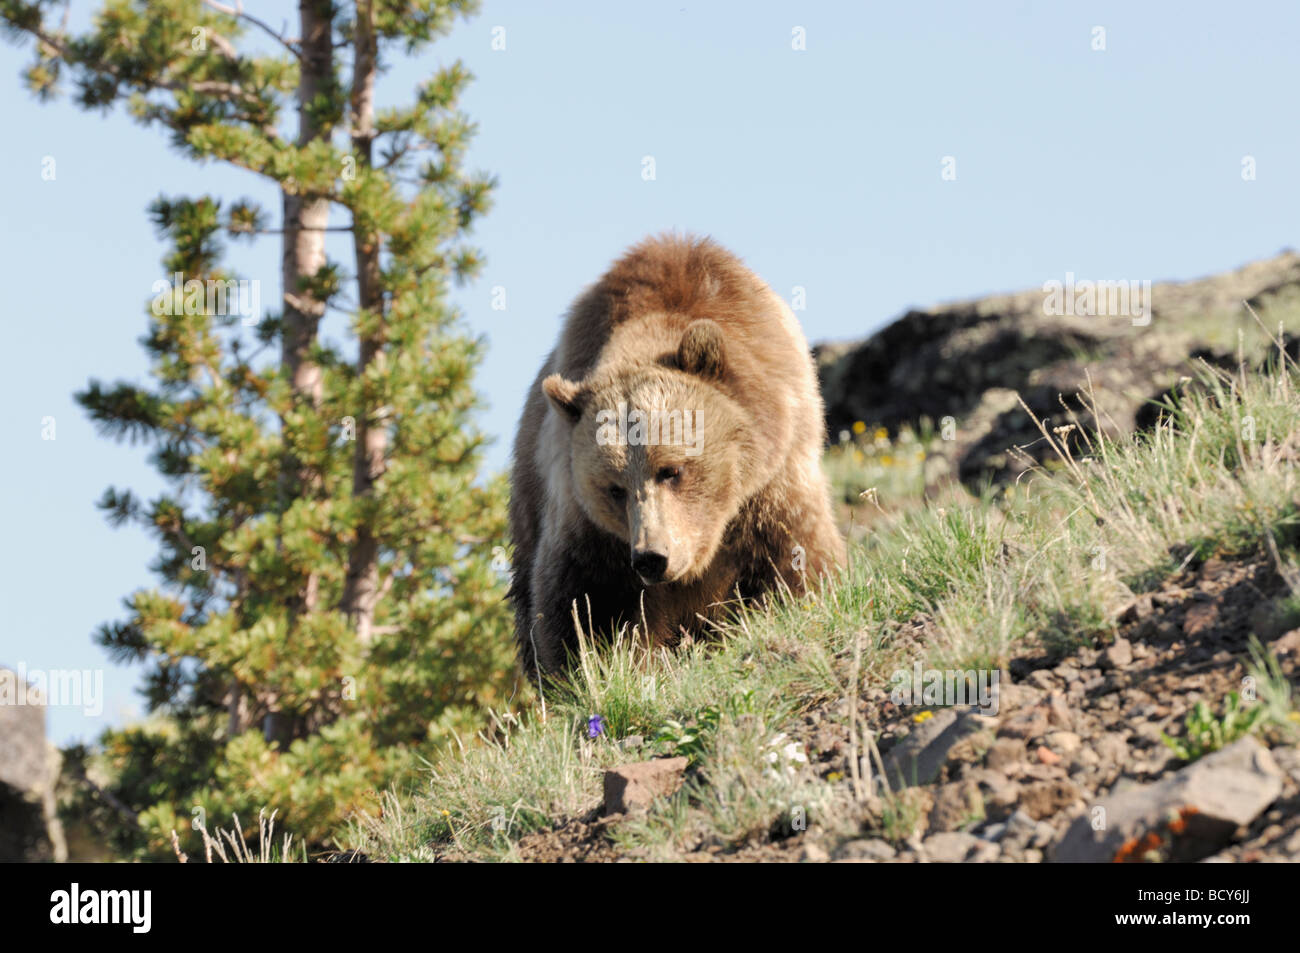 Stock photo of a grizzly bear walking along a hillside, Yellowstone National Park, Wyoming, USA, 2009. Stock Photo